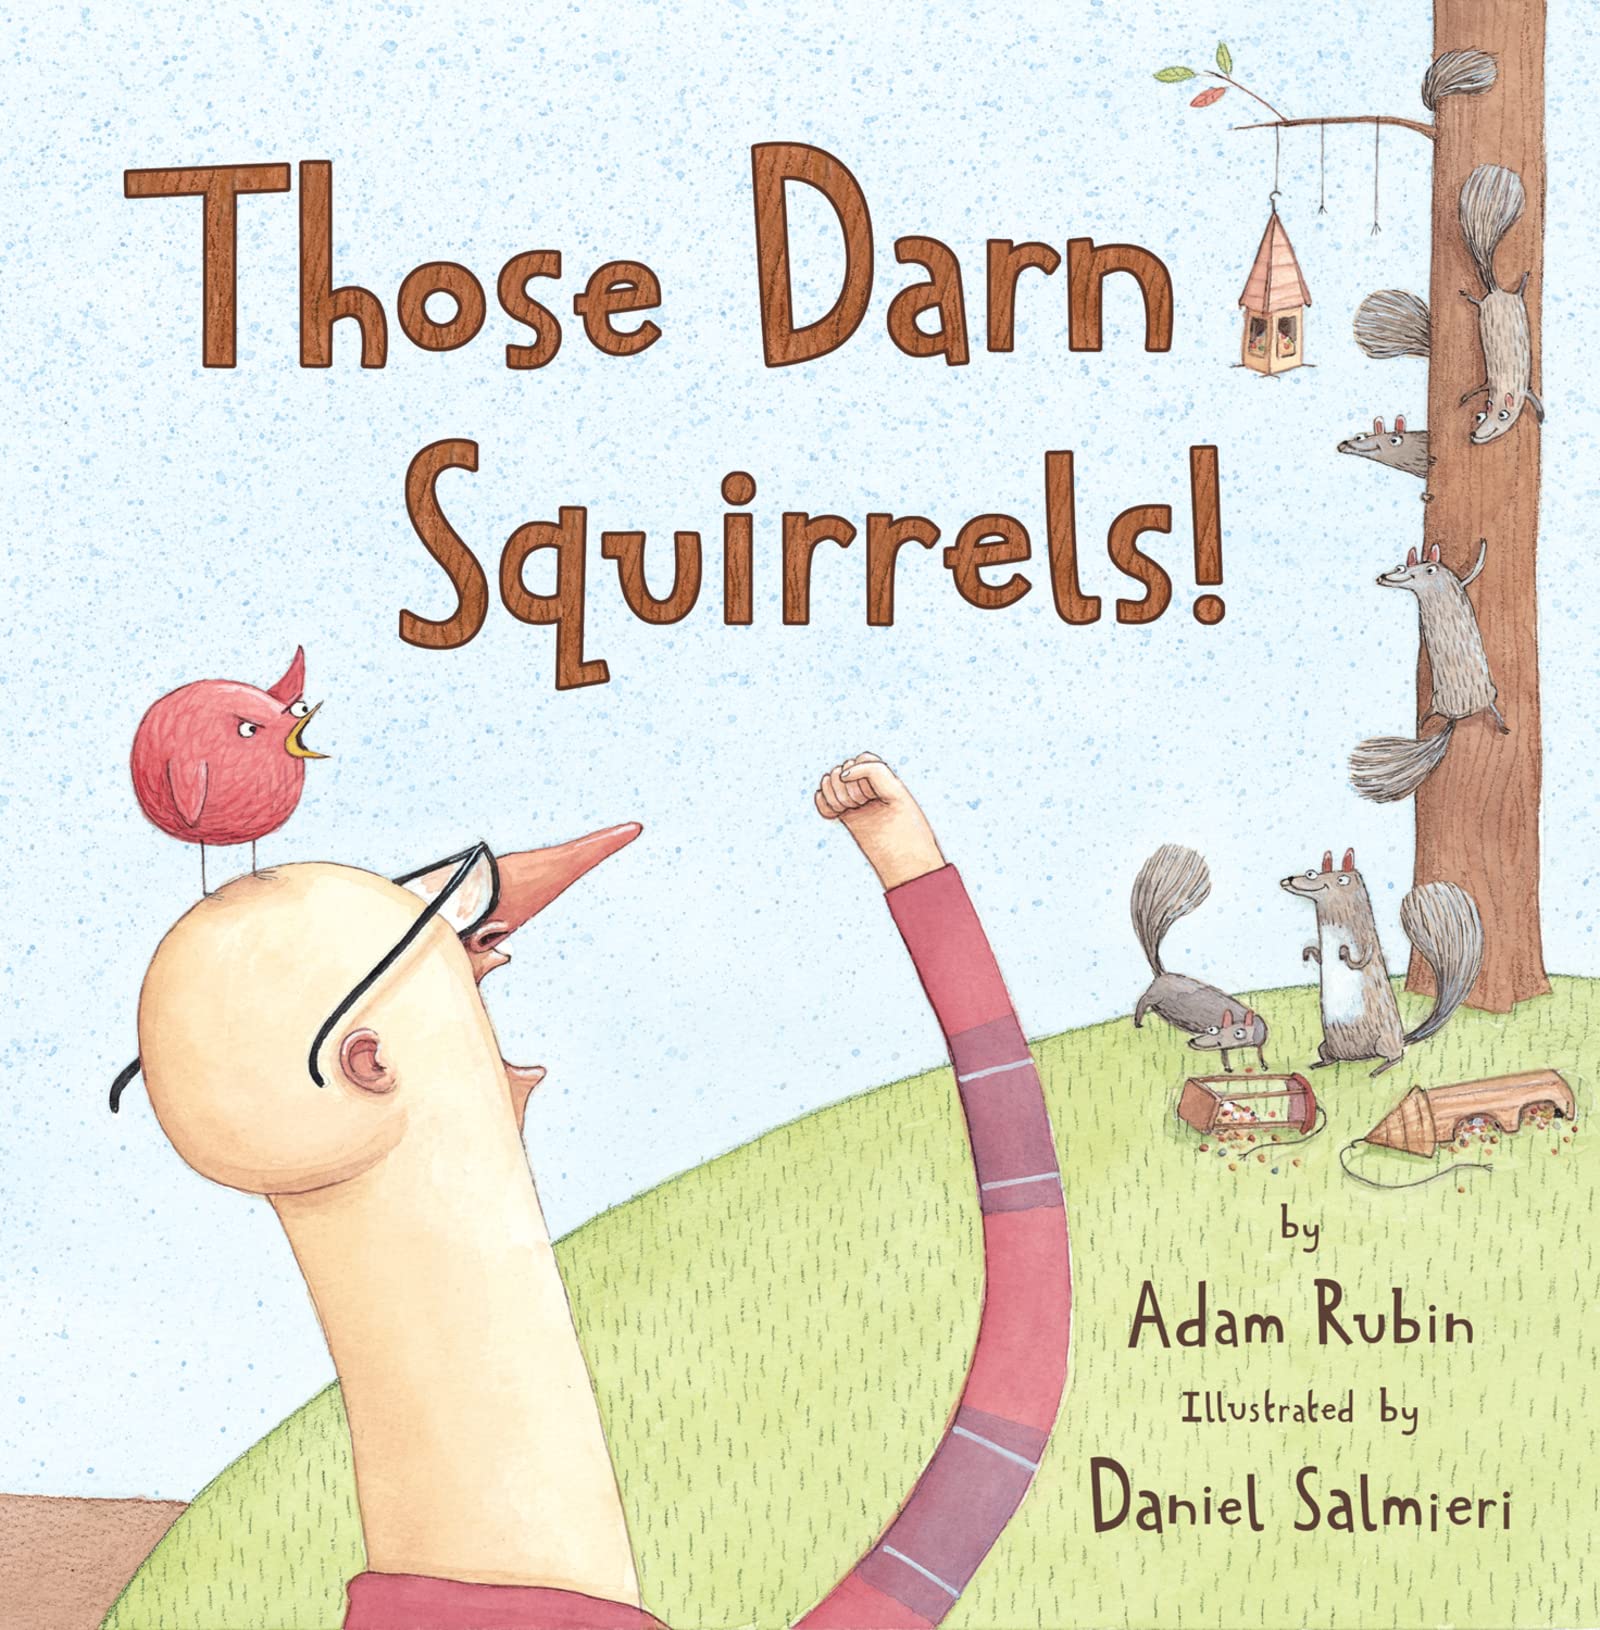 speech and language teaching concepts for Those Darn Squirrels! in speech therapy​ ​